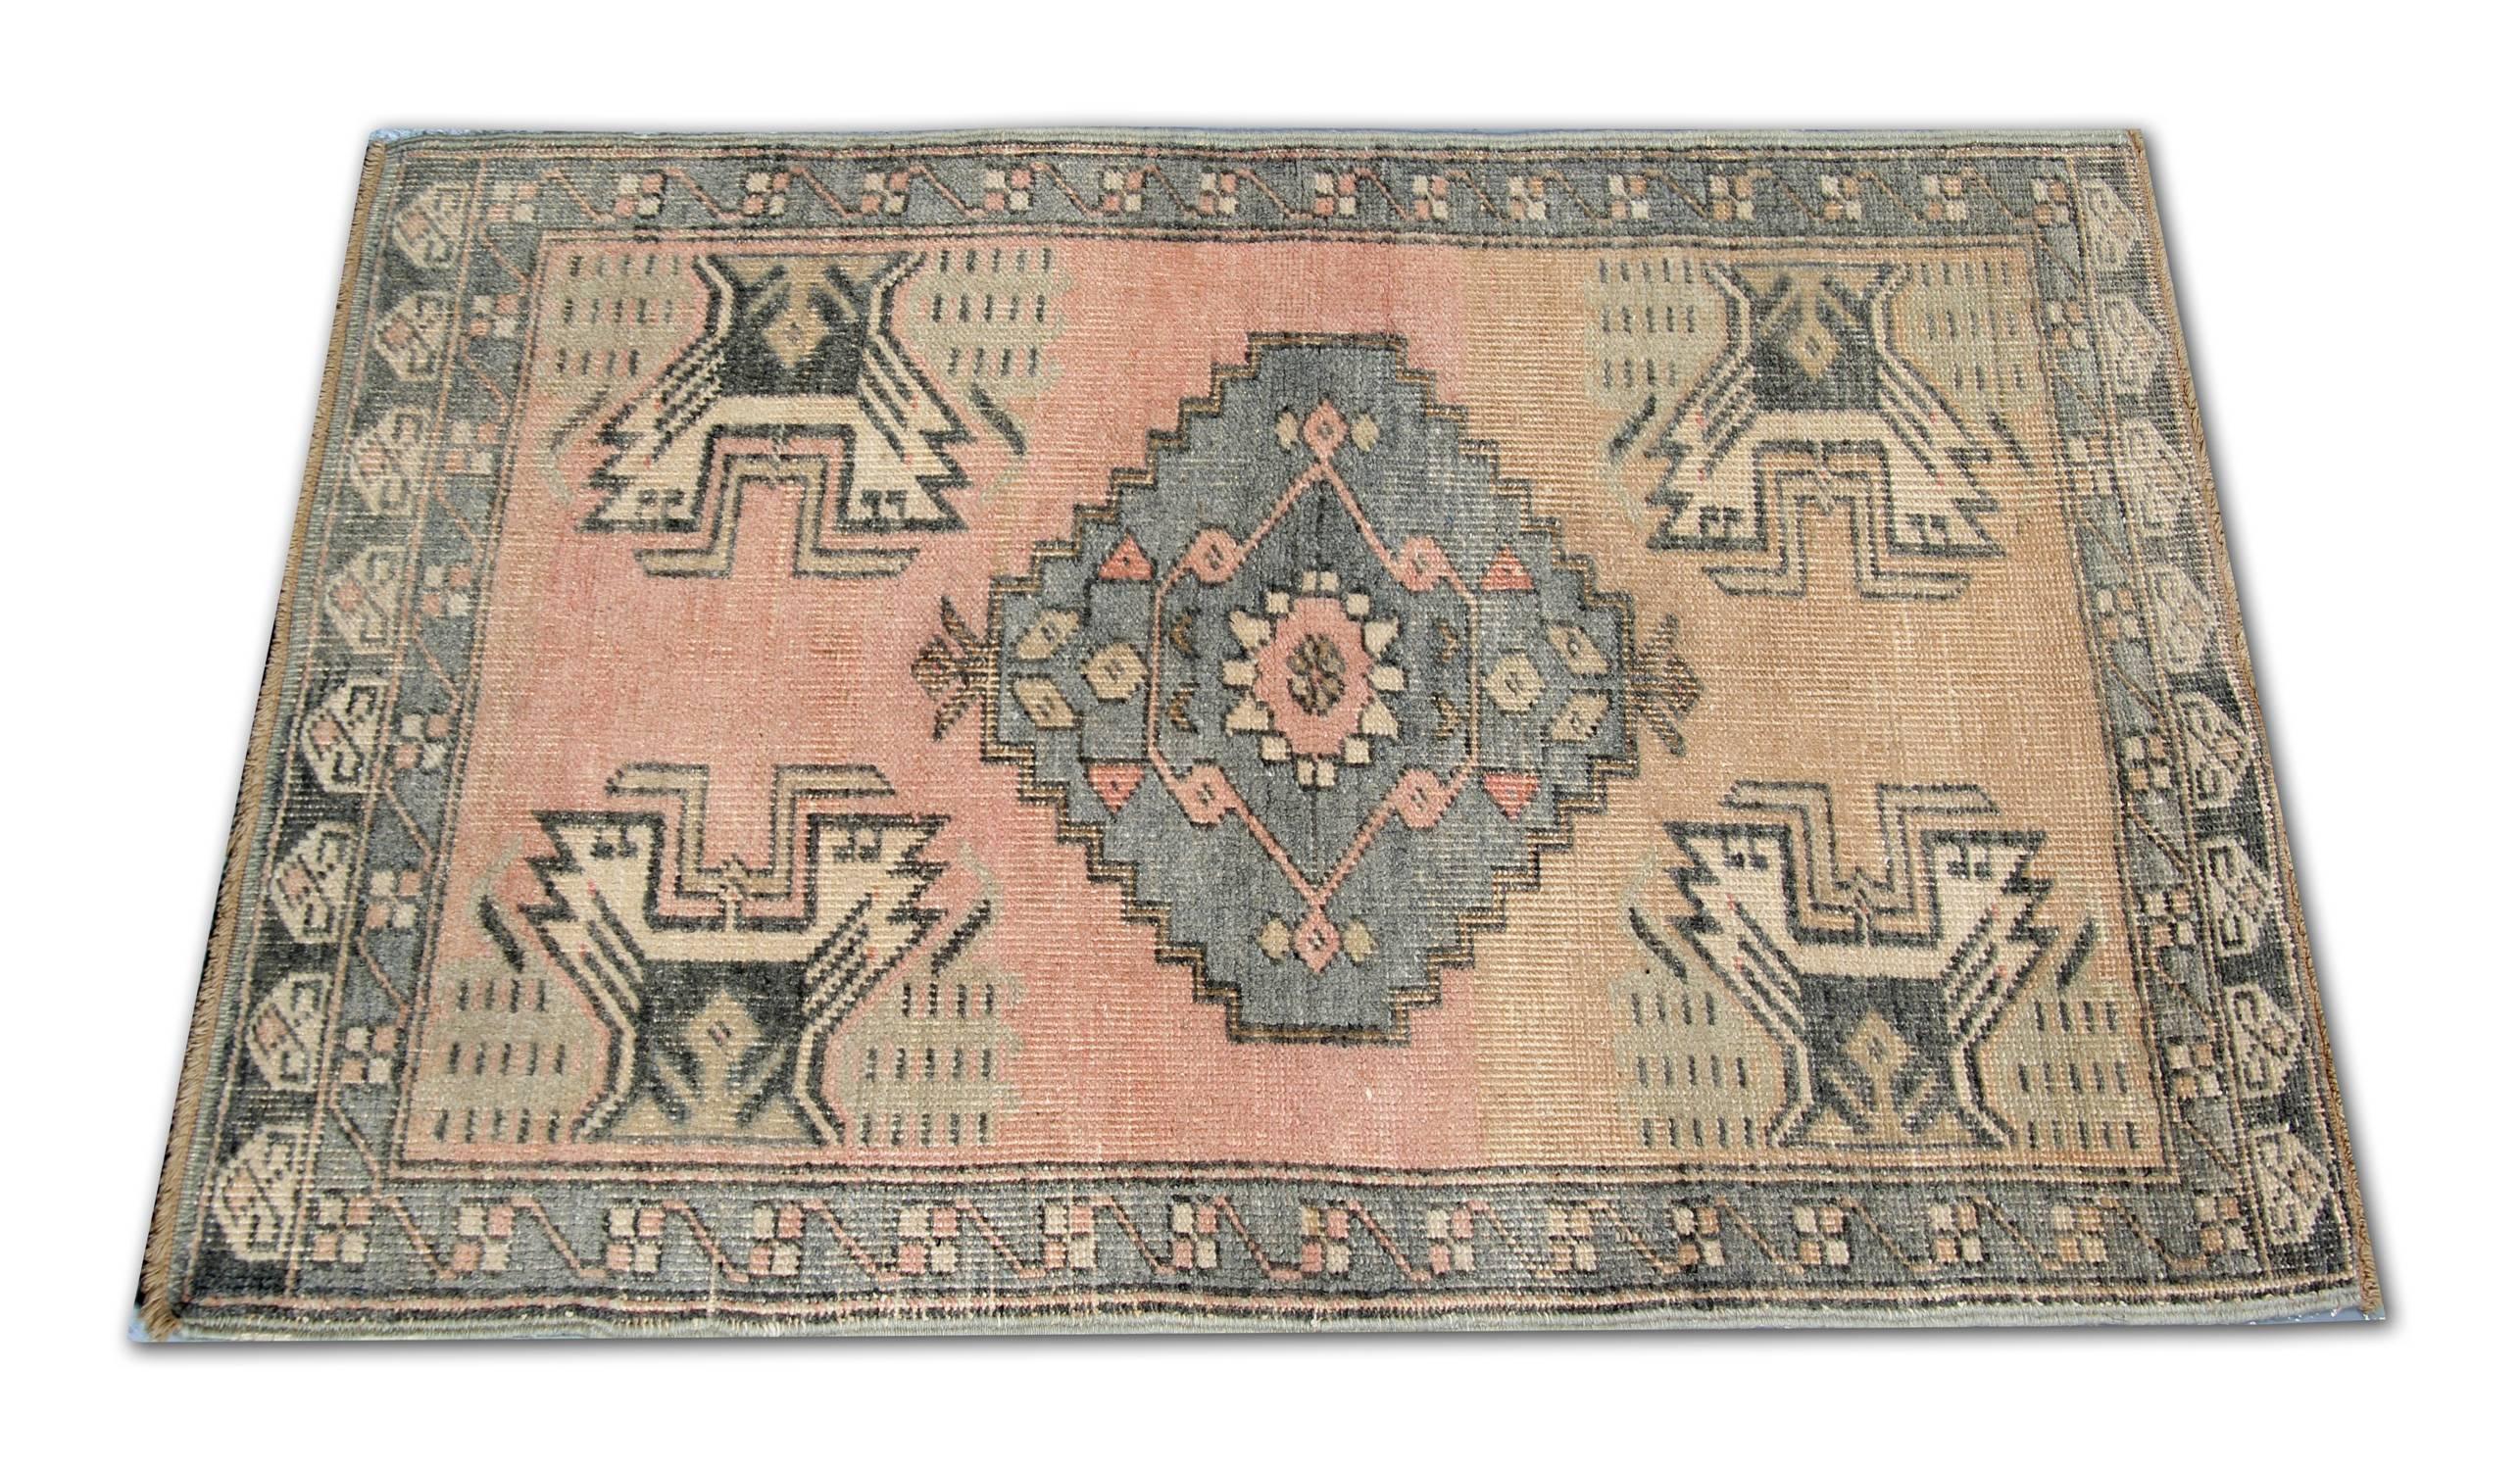 A handmade carpet vintage Anatolian carpet rug in an excellent condition. geometric rug design and a palette of nice light colours, circa the 1950s. This pink rug can be a good idea as small area rugs and is a handwoven rug with organic